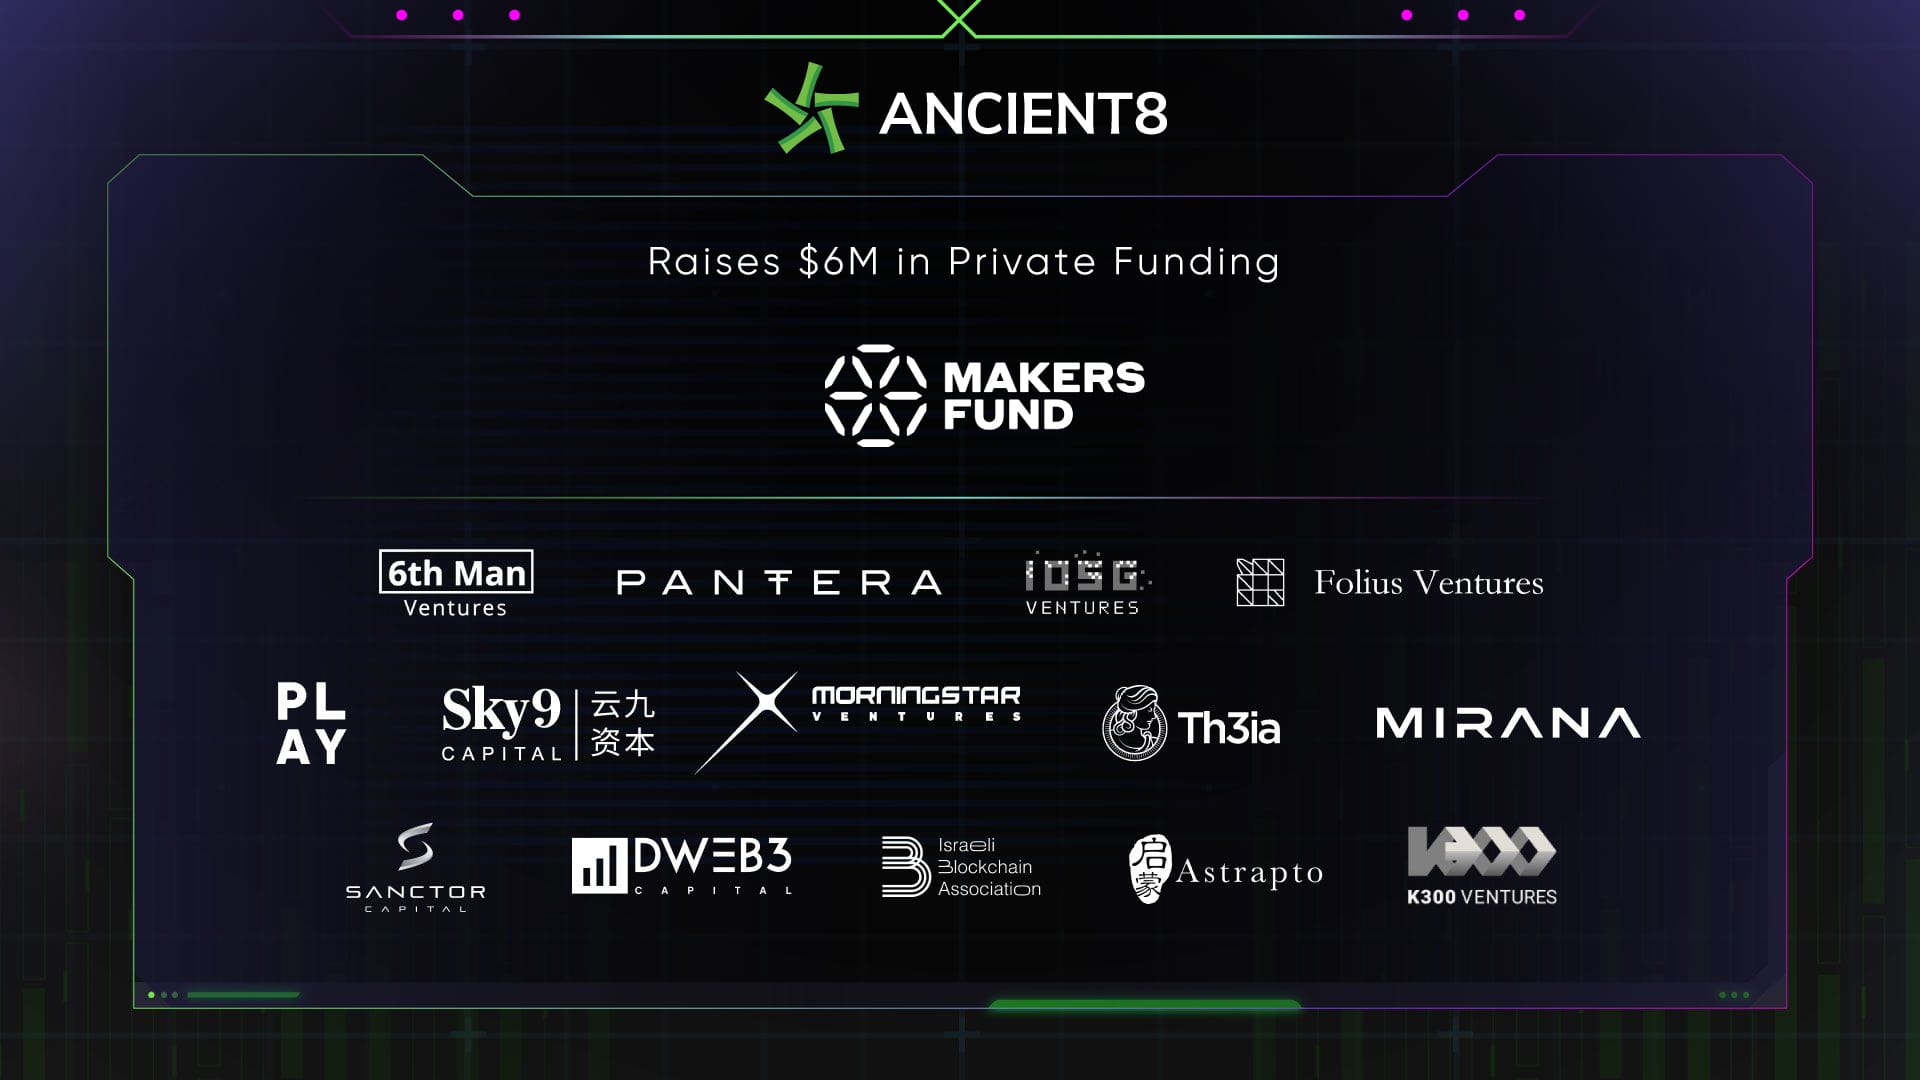 Ancient8 Raises $6M to Build Software Infrastructure for GameFi